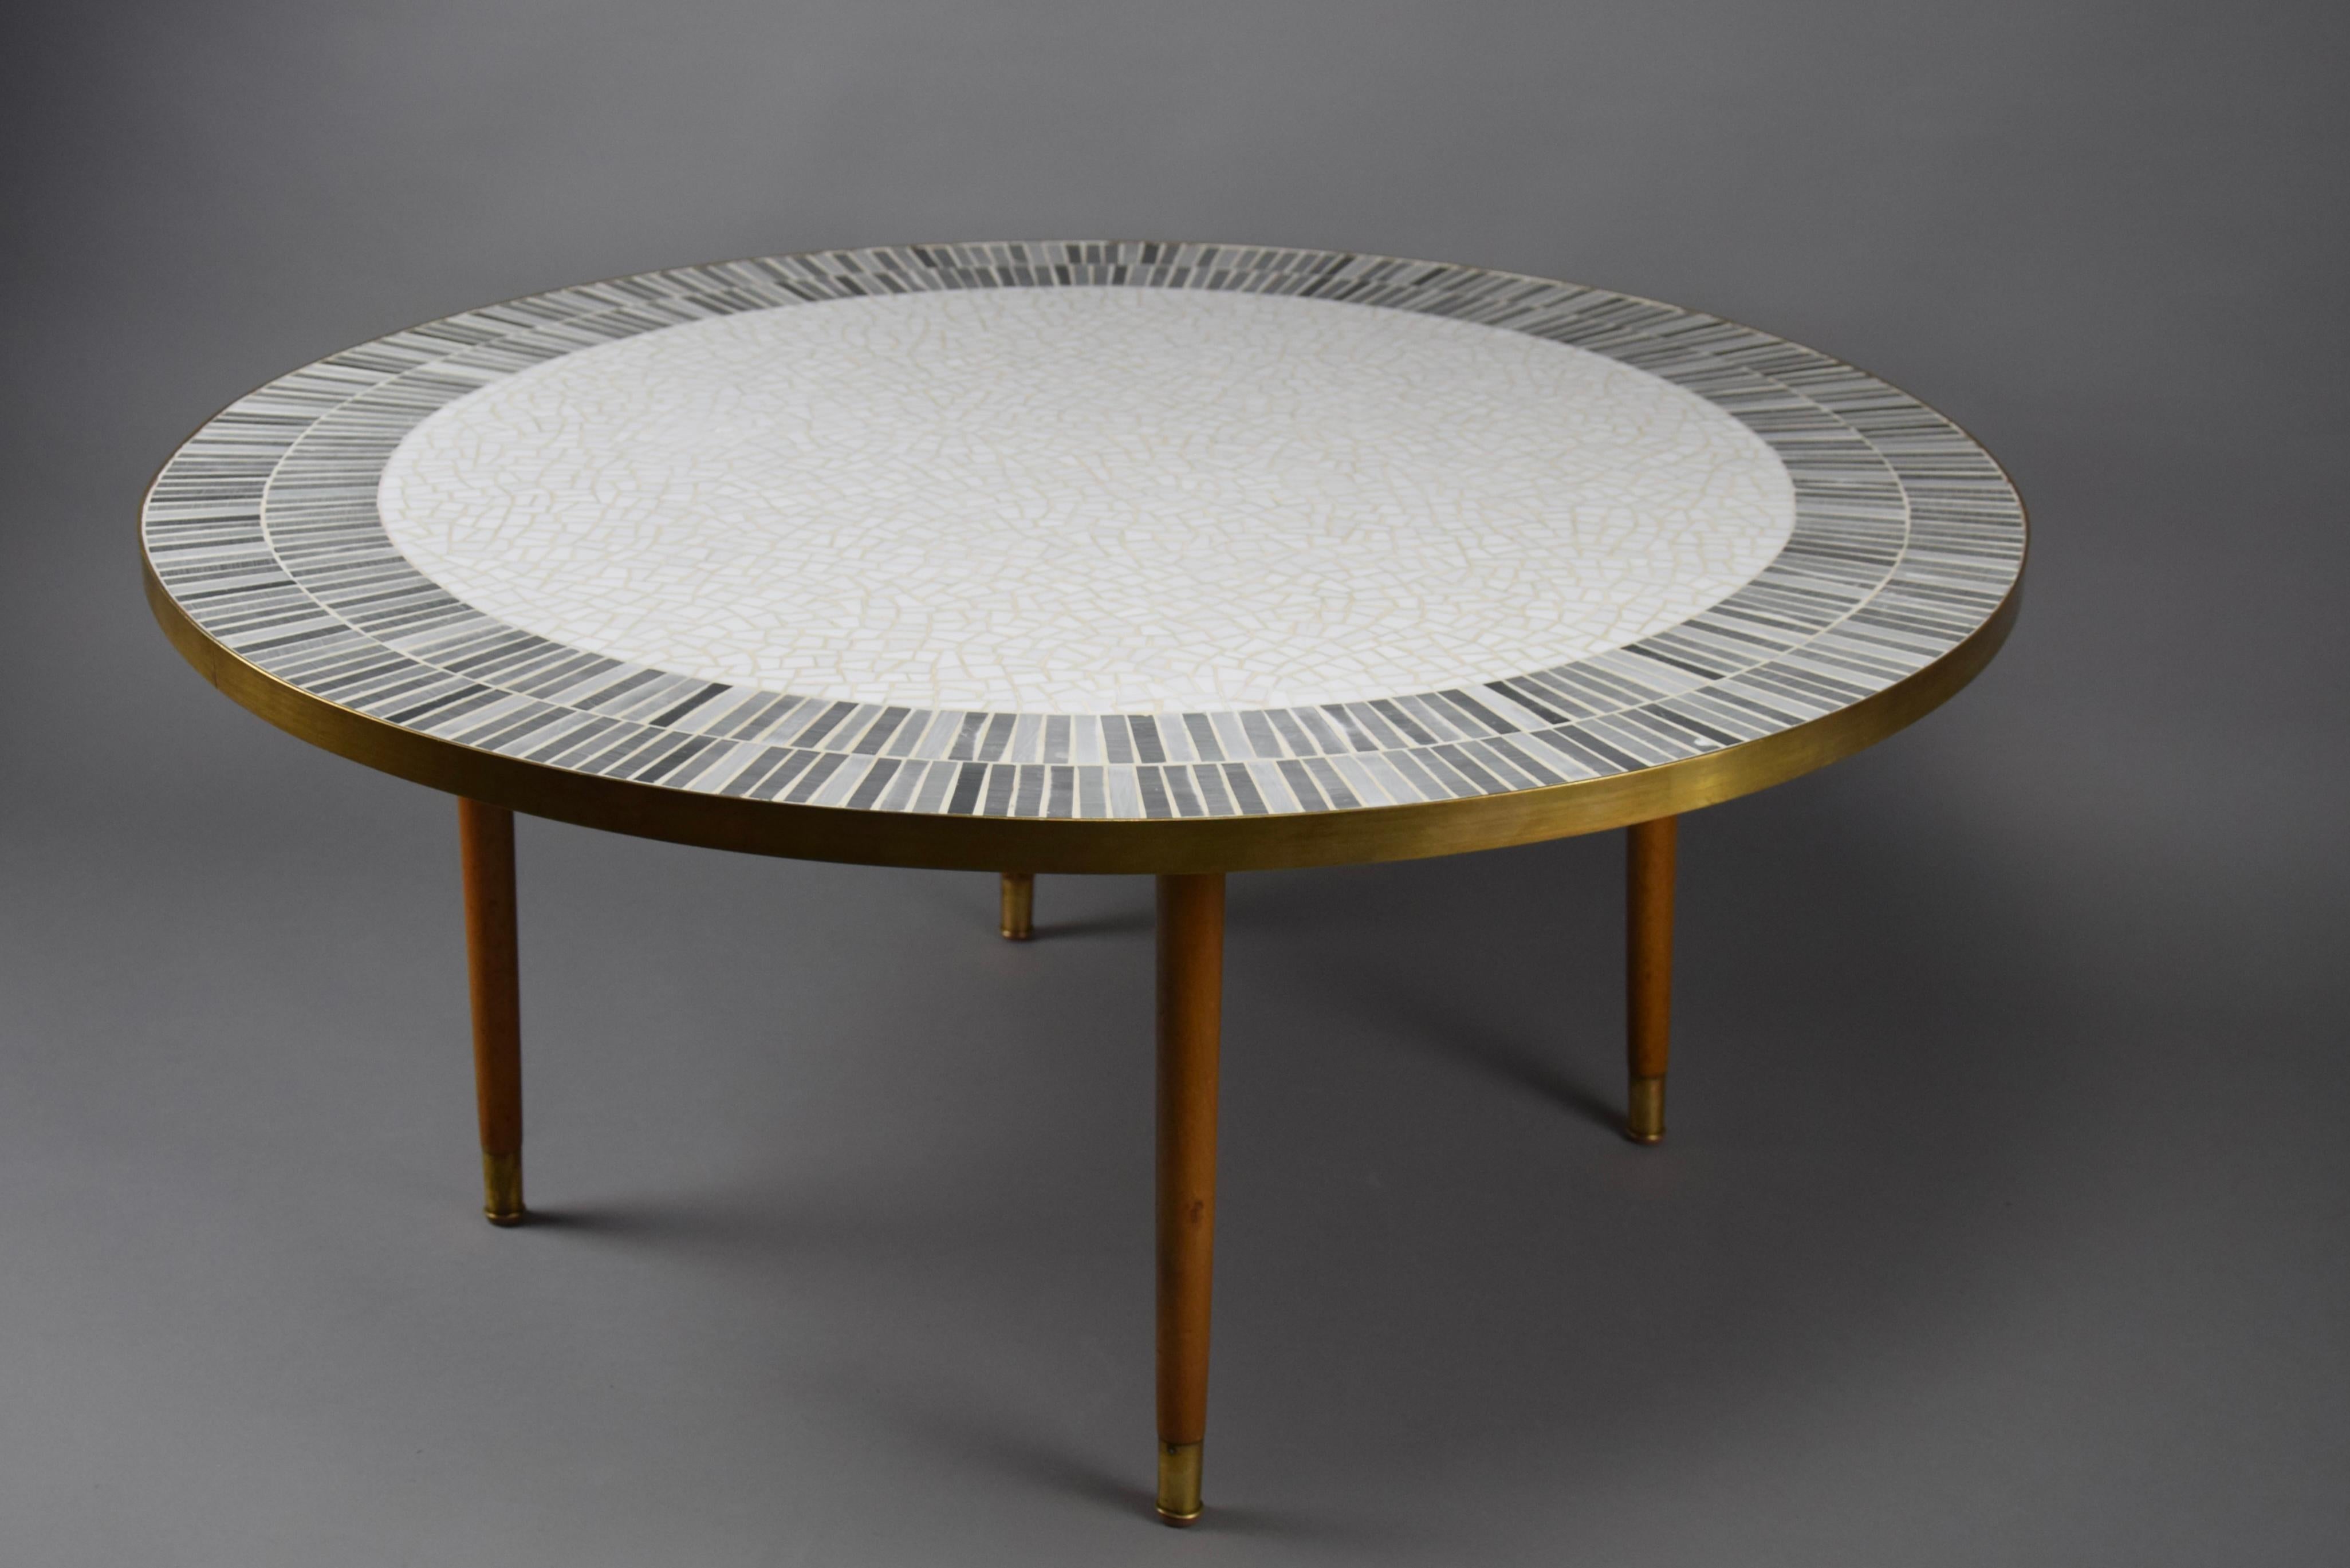 Introducing the epitome of sophistication: the exquisite round grey and white mosaic coffee table, a masterpiece designed by the renowned German sculptor Berthold Muller in the 1960s. This coffee table isn't just furniture; it's a work of art that